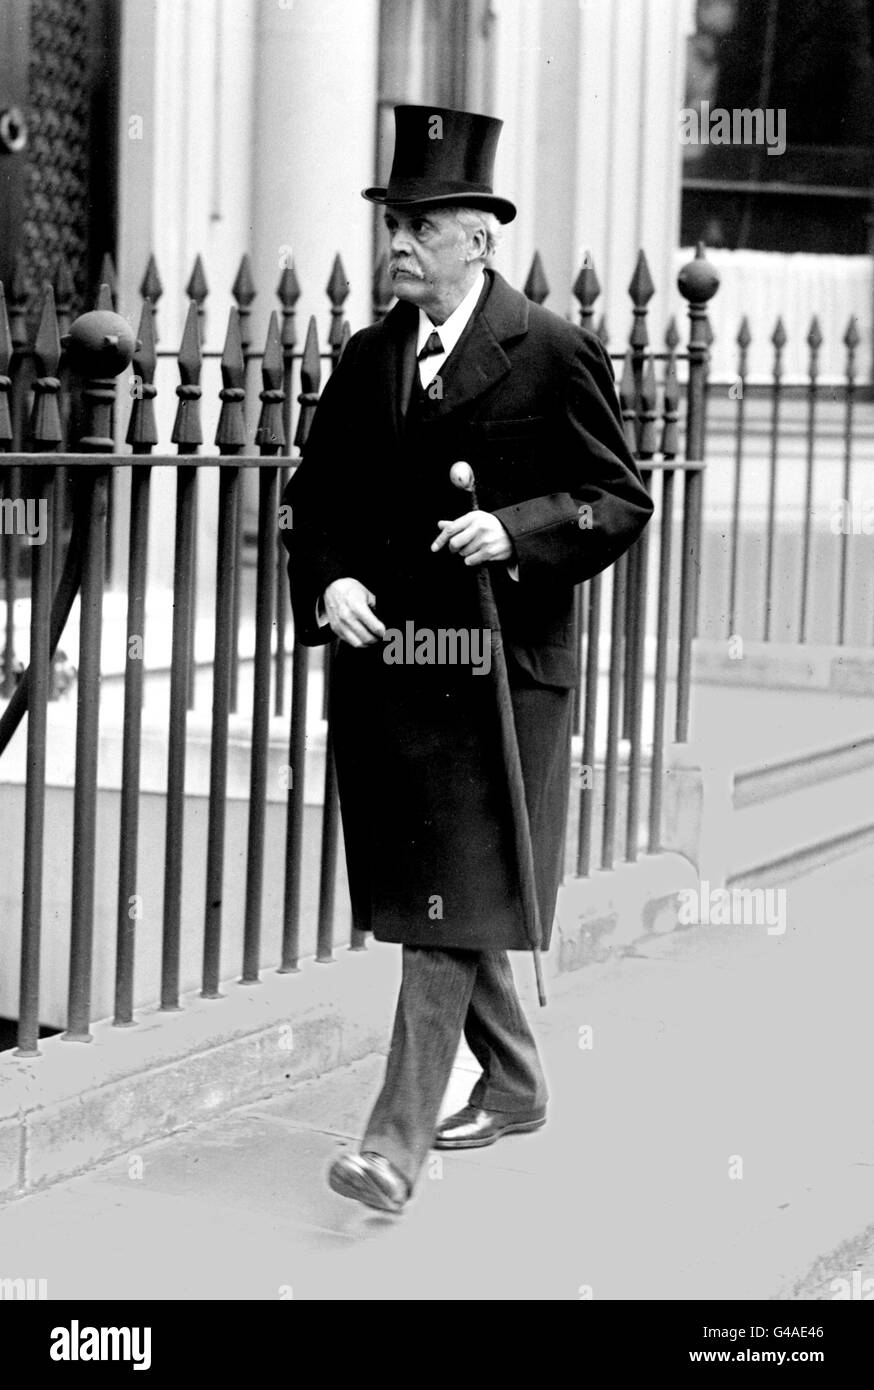 MR ARTHUR BALFOUR ON HIS WAY TO THE HOUSE OF COMMONS TO OPPOSE THE HOME RULE BILL 1912. * 13/9/01: Iain Duncan Smith elected Tory leader. Stock Photo